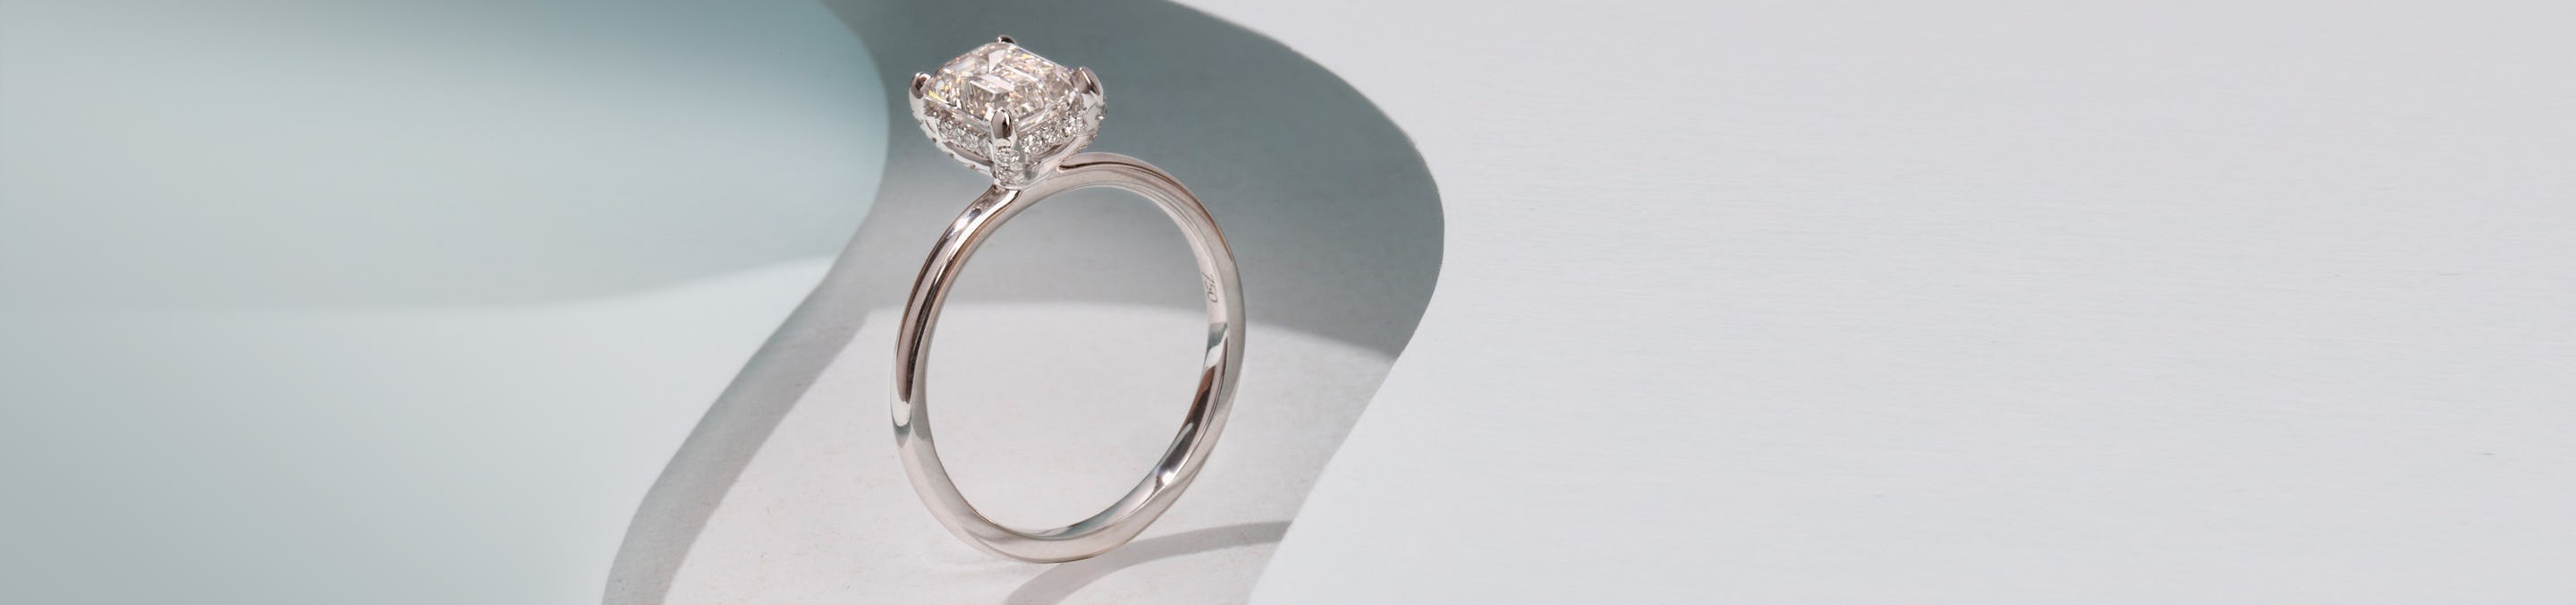 Solitaire engagement ring in platinum with a emerald cut lab grown diamond